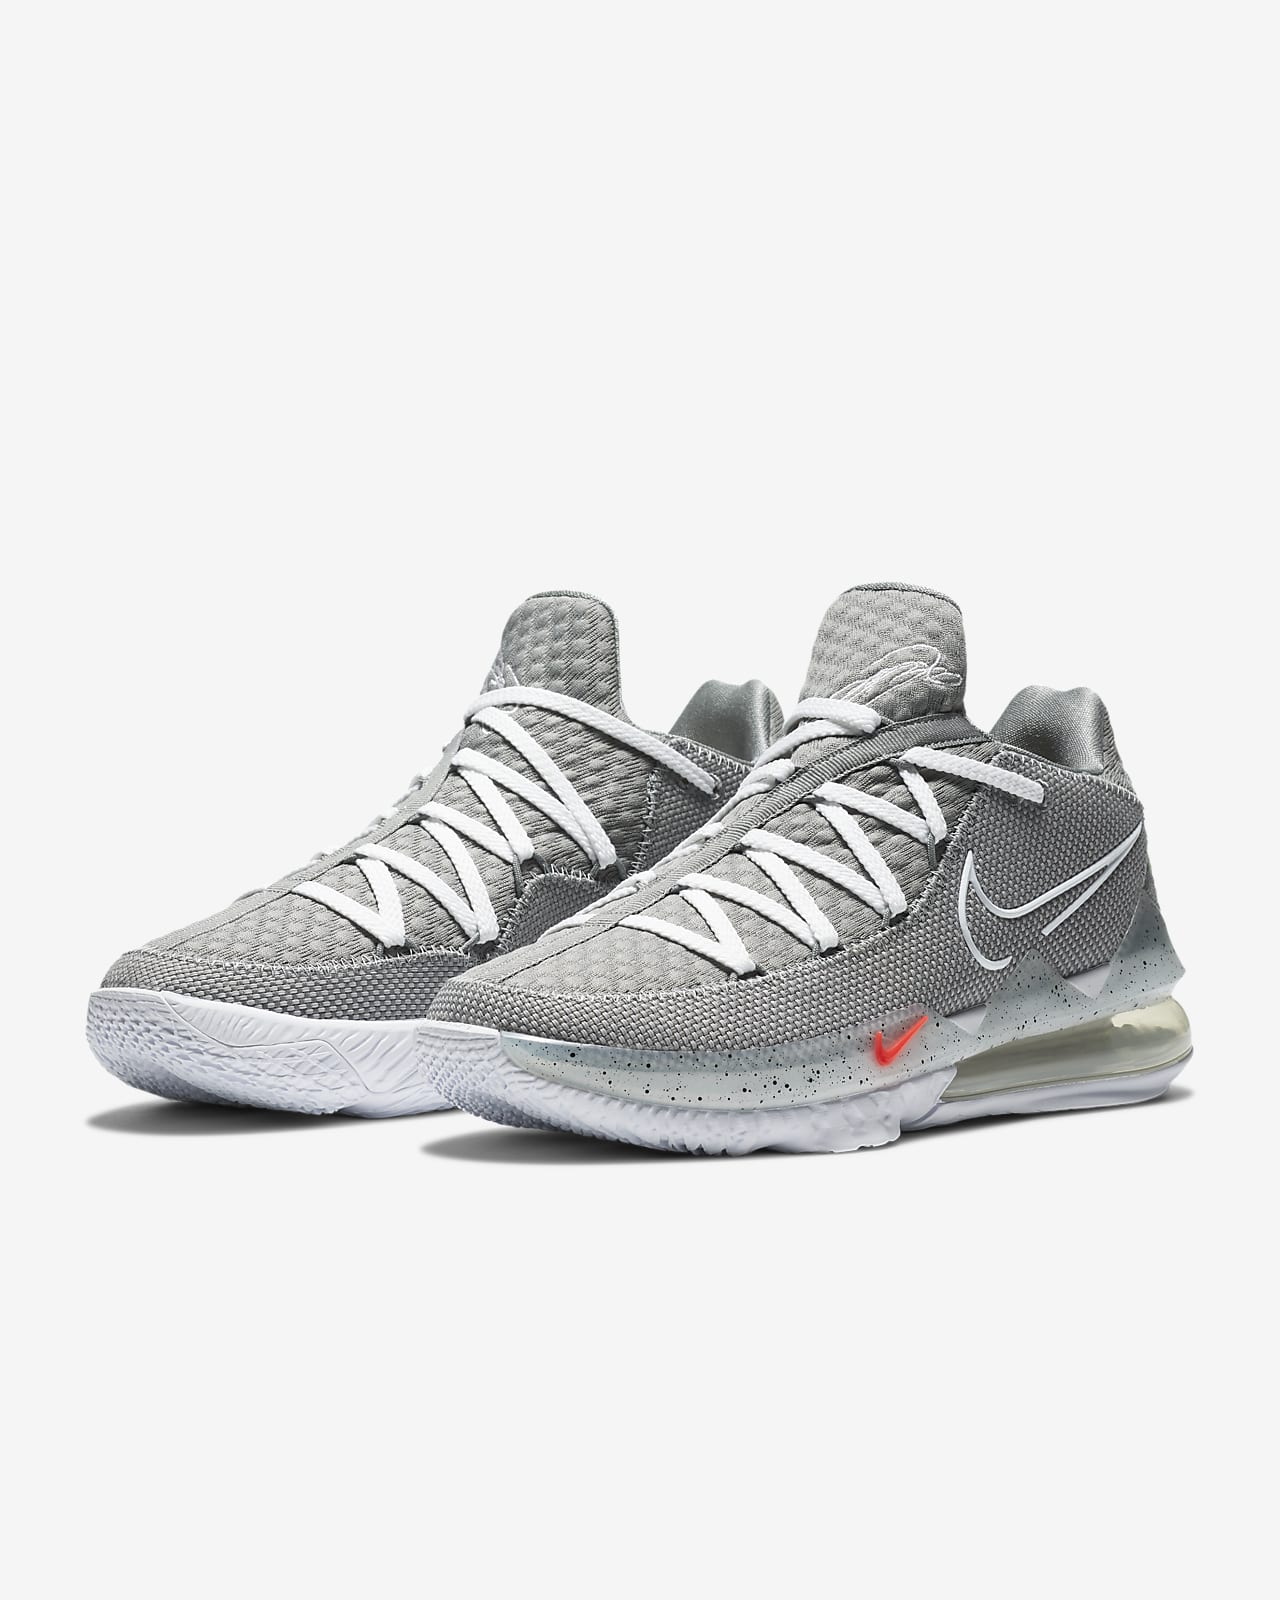 lebron 17 low particle gray